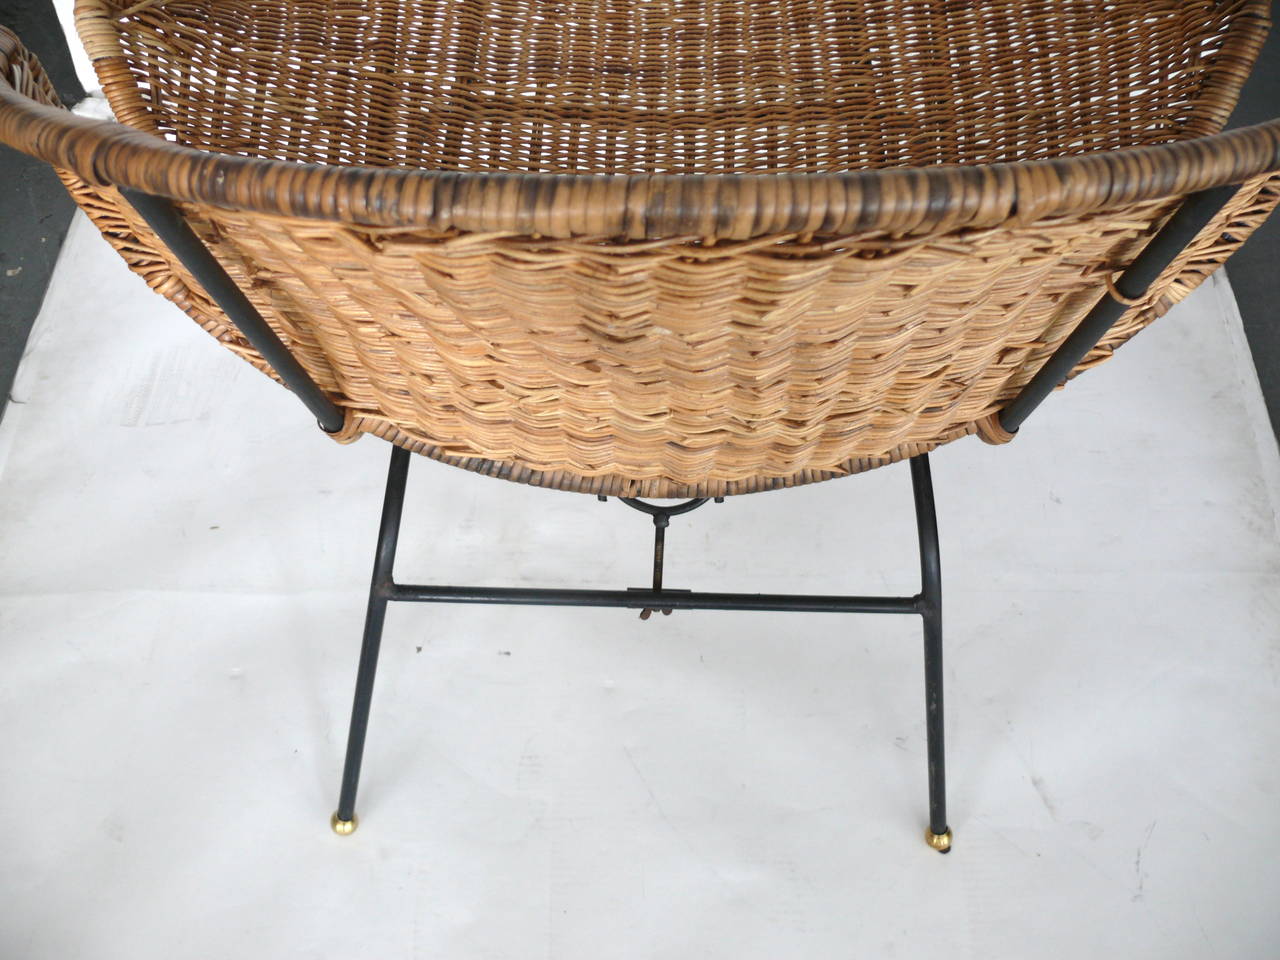 Sculptural Wicker and Rattan Clam Chairs 3